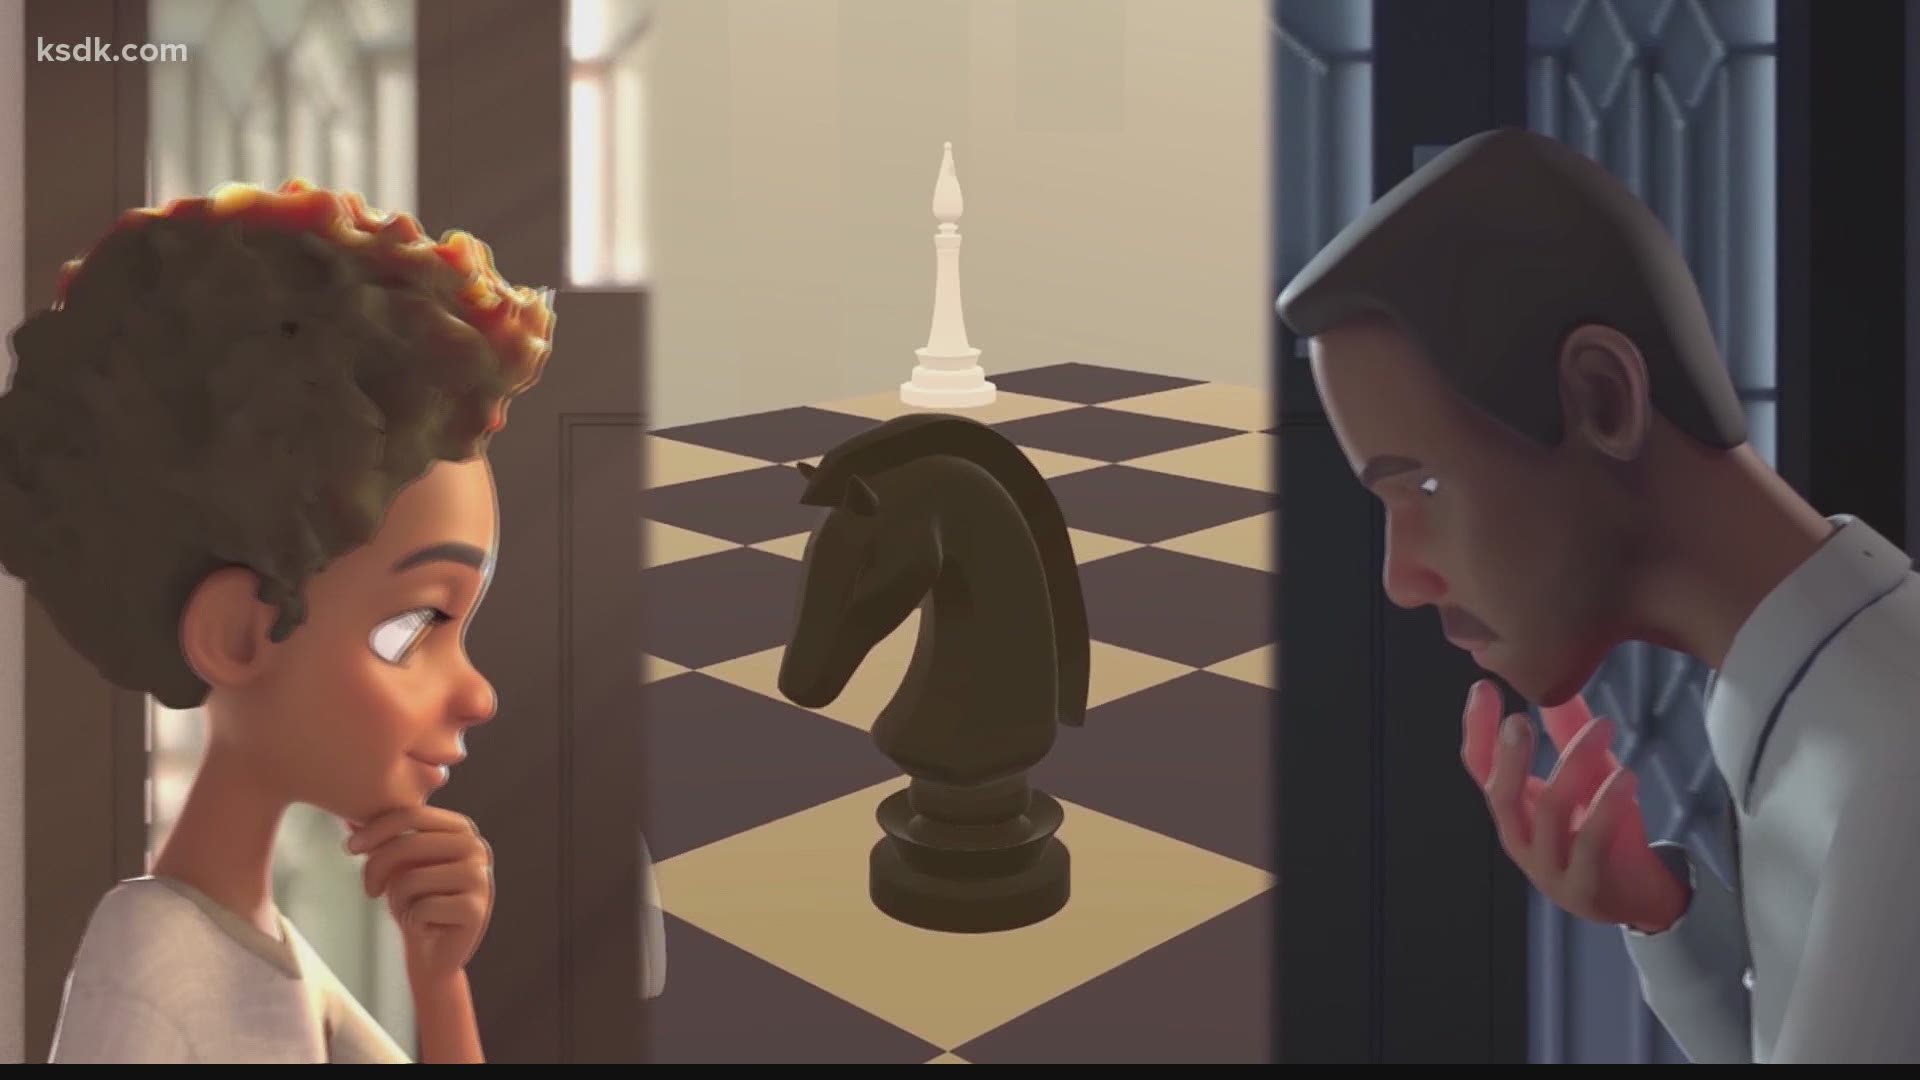 St. Louis man creates animated short 'The King and the Pawn' 